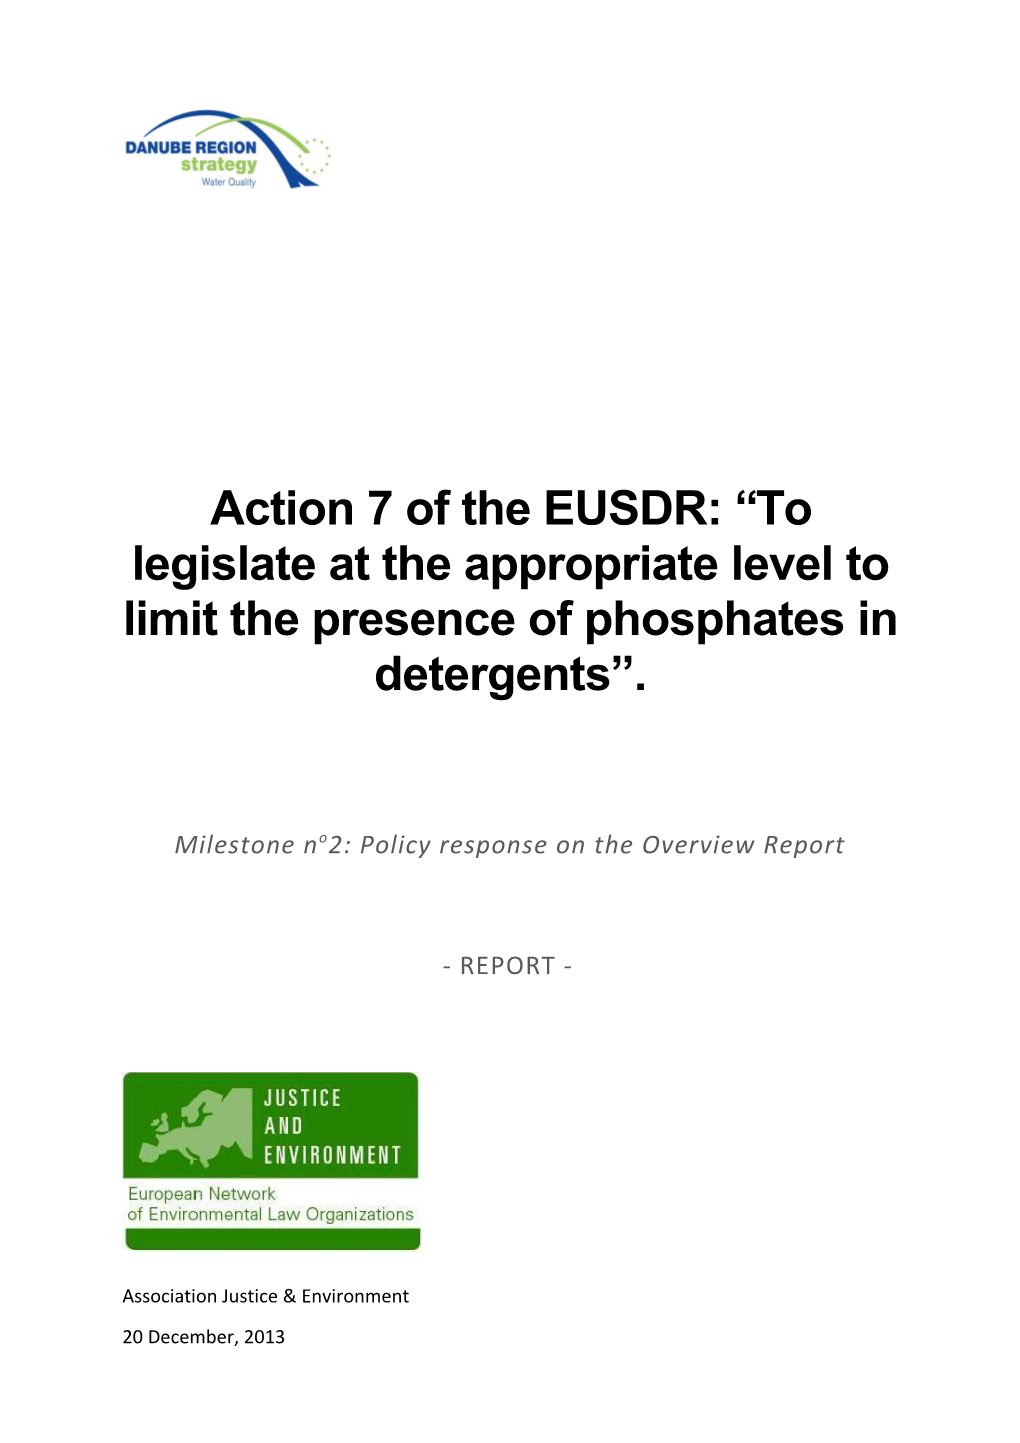 Milestone No2: Policy Response on the Overview Report